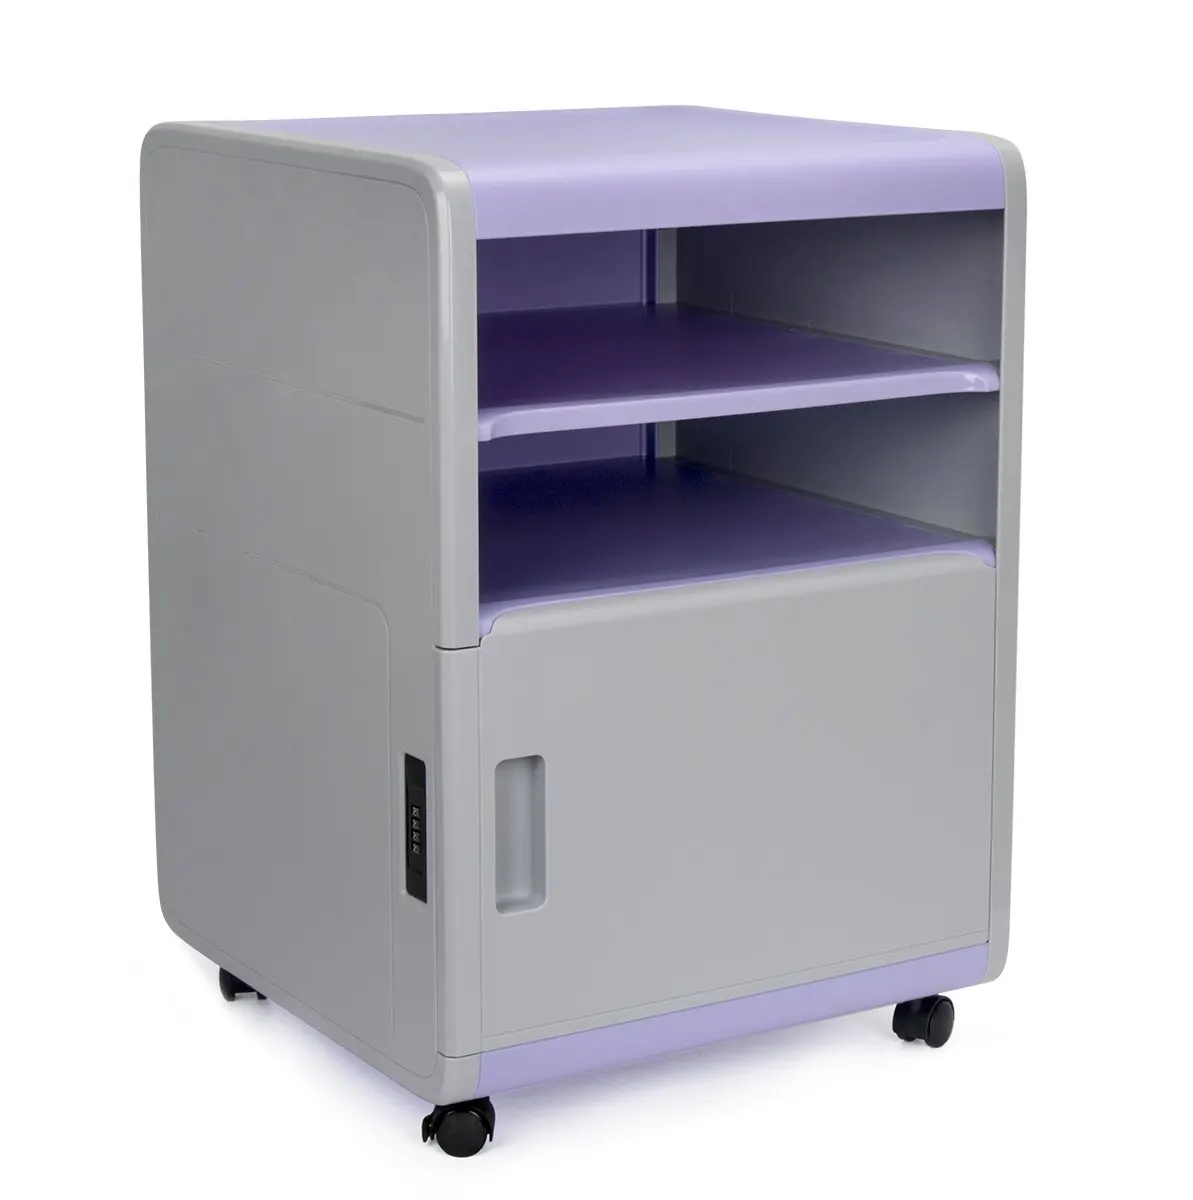 Cheap Office Filing Cupboard Find Office Filing Cupboard Deals On Line At Alibaba Com